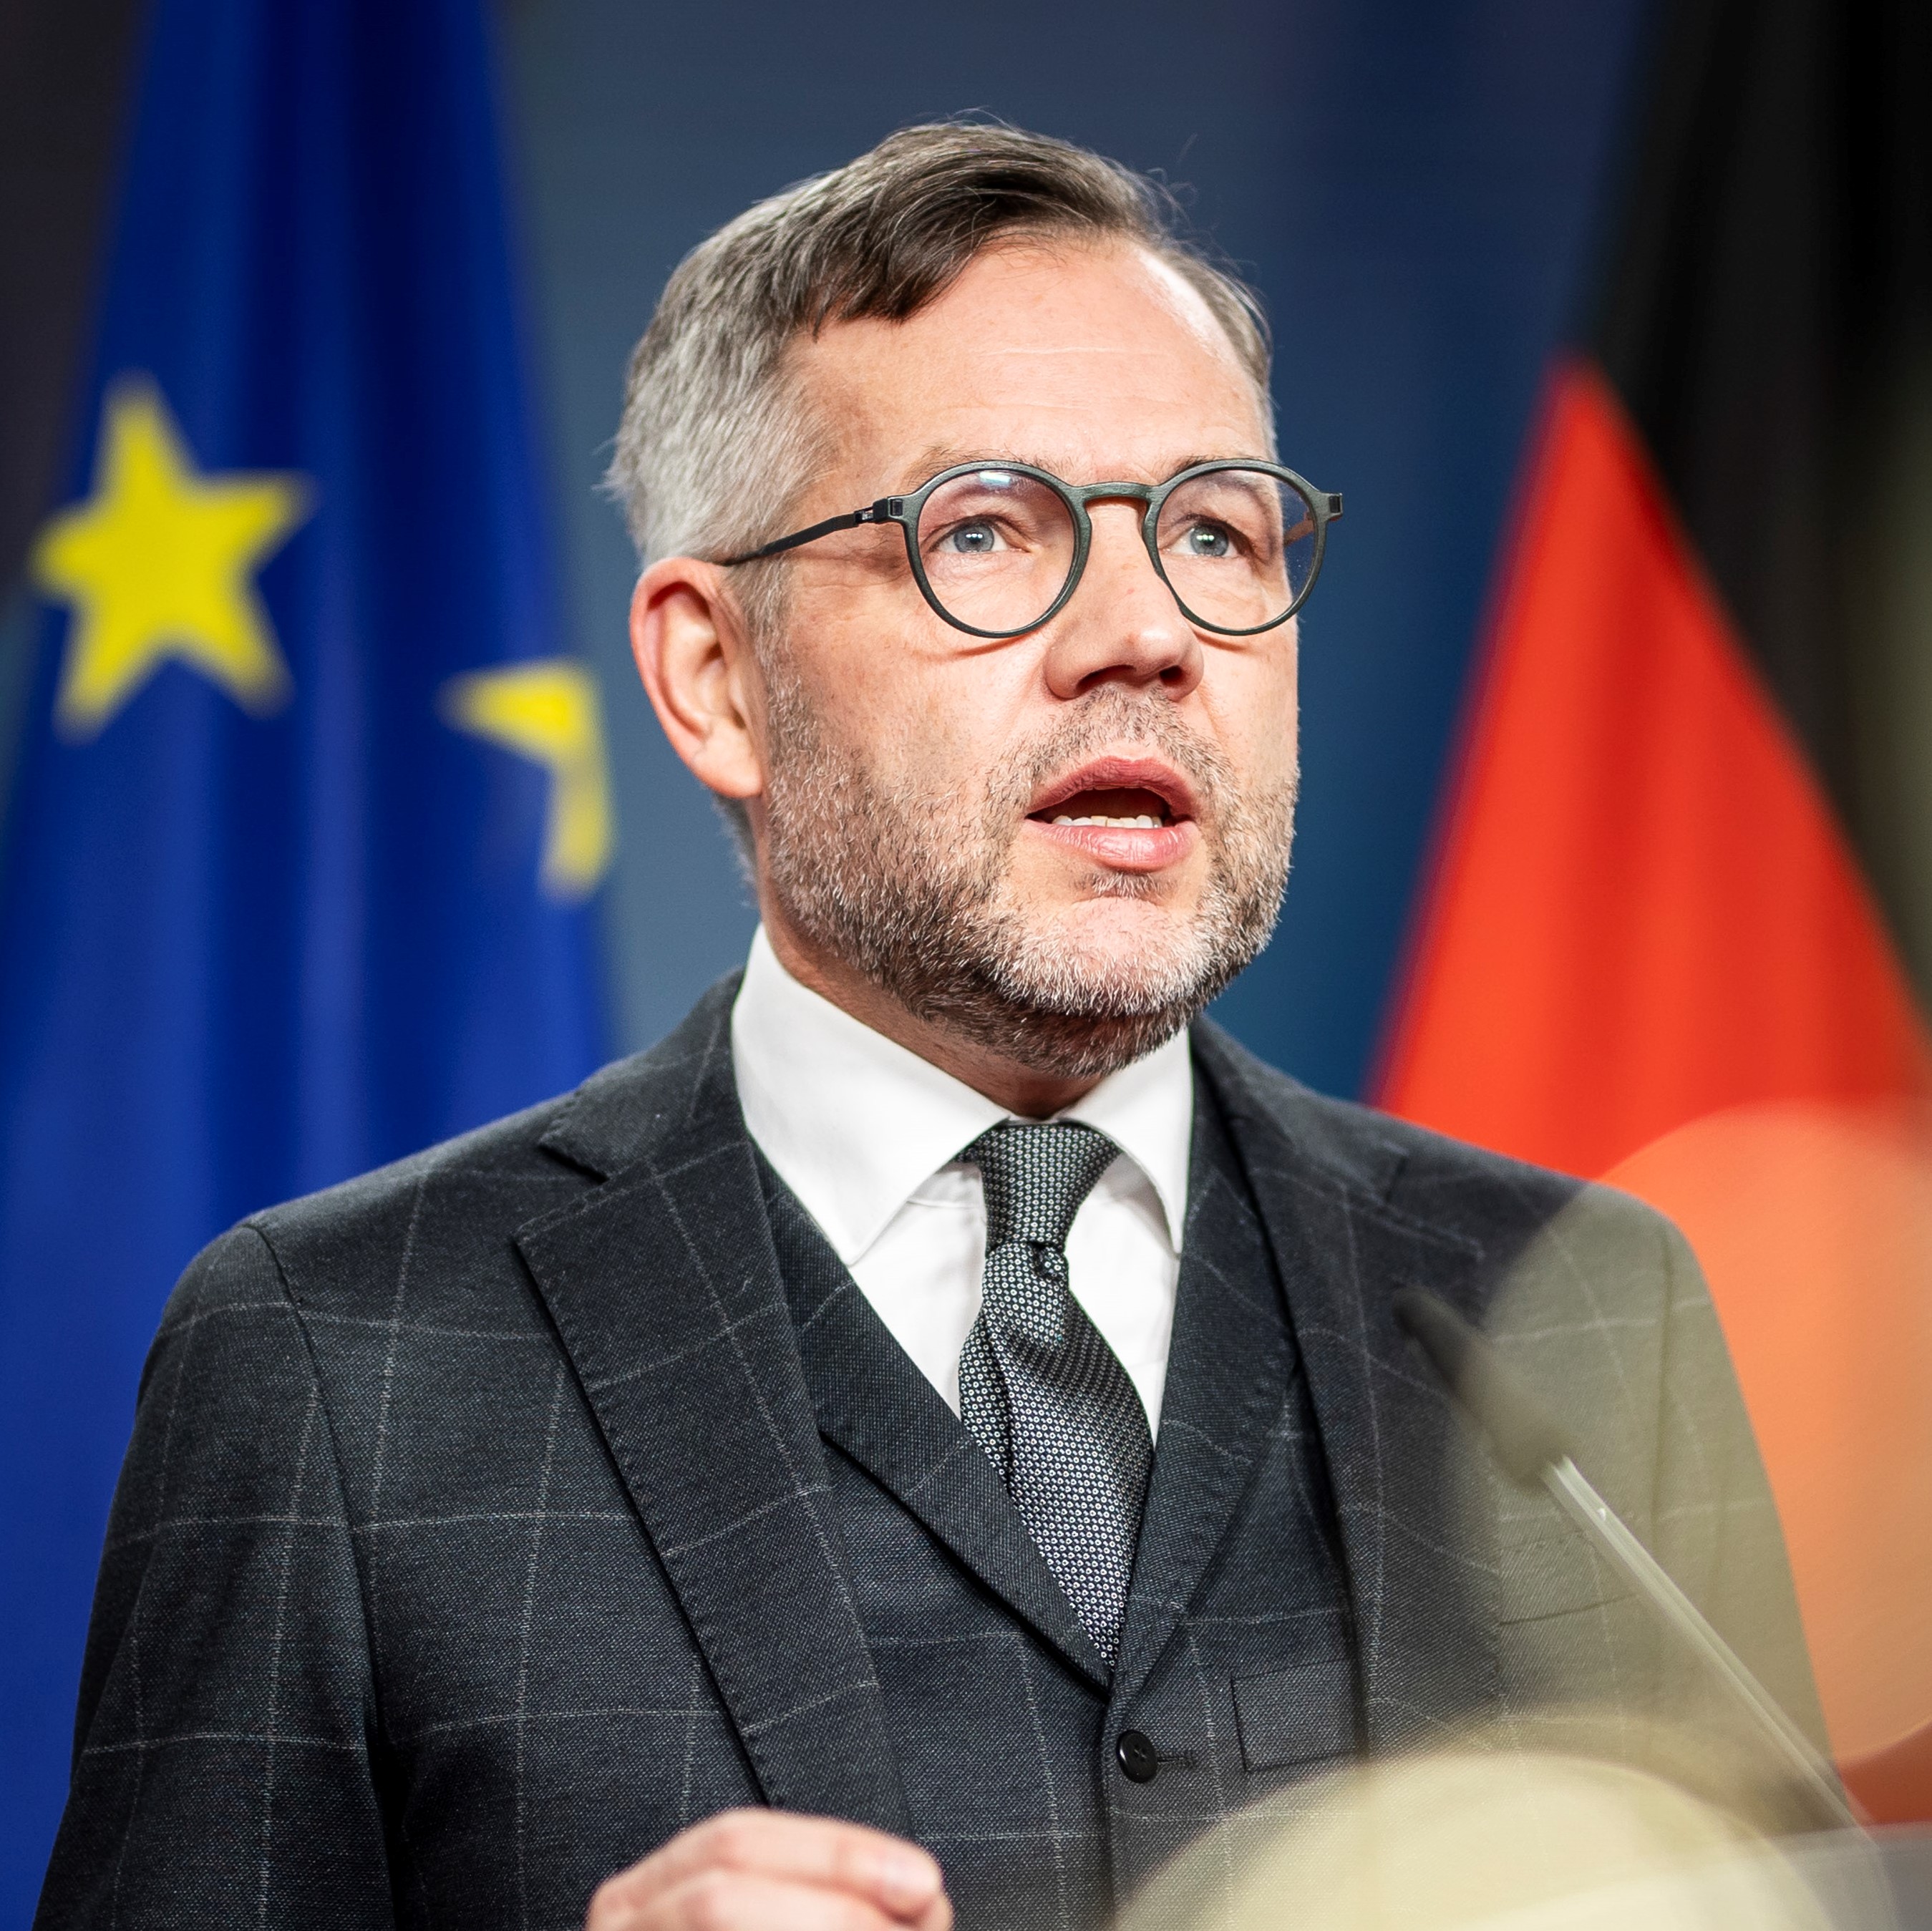 Michael Roth, Germany's Minister of State for Europe